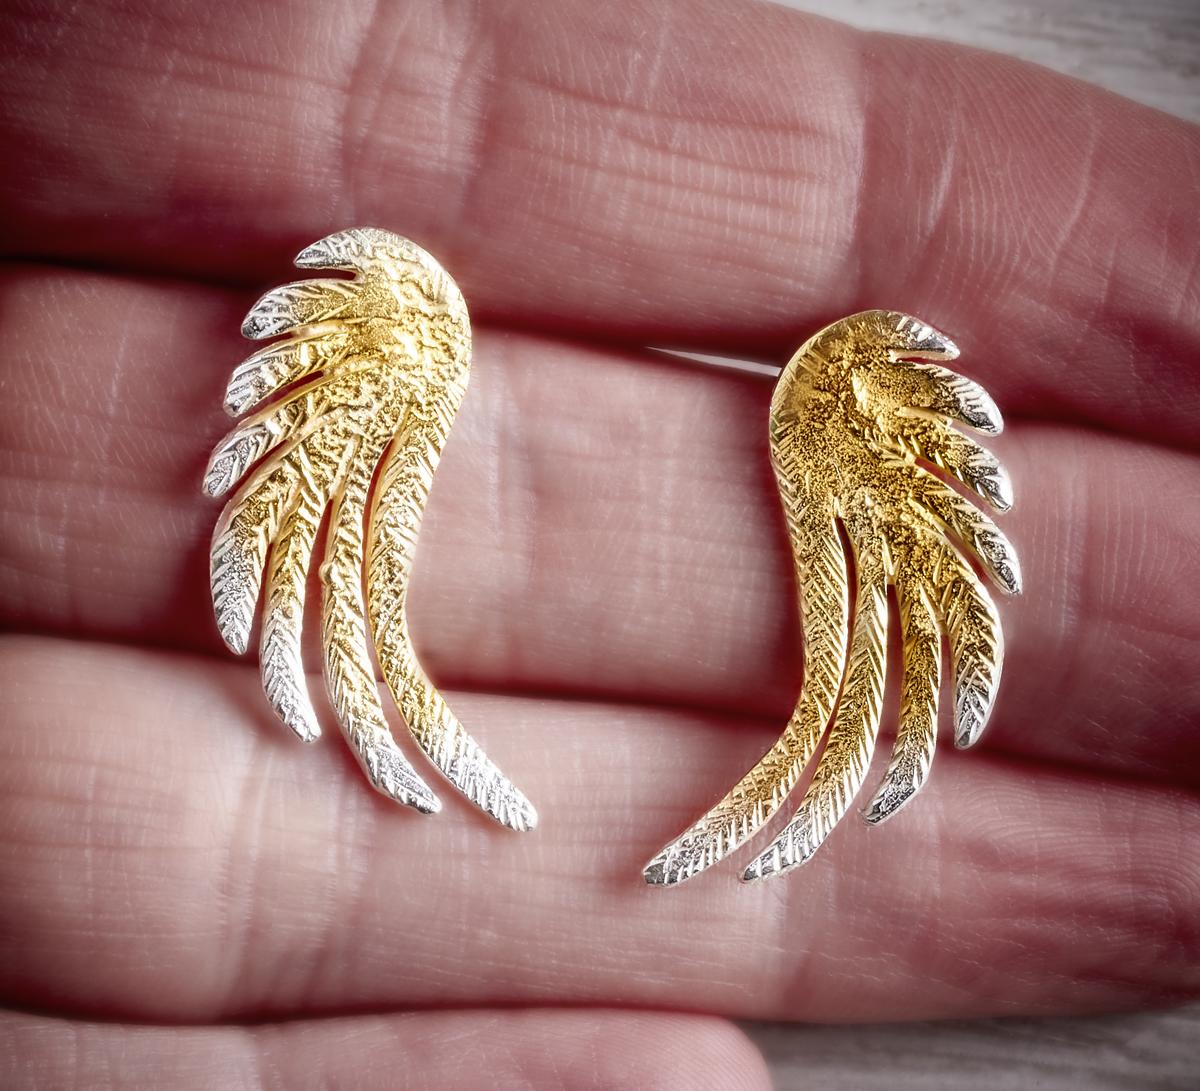 large silver and gold stud angel wing earrings by Fi Mehra available at THE JEWELLERY MAKERS, image property of EMMA WHITE-2